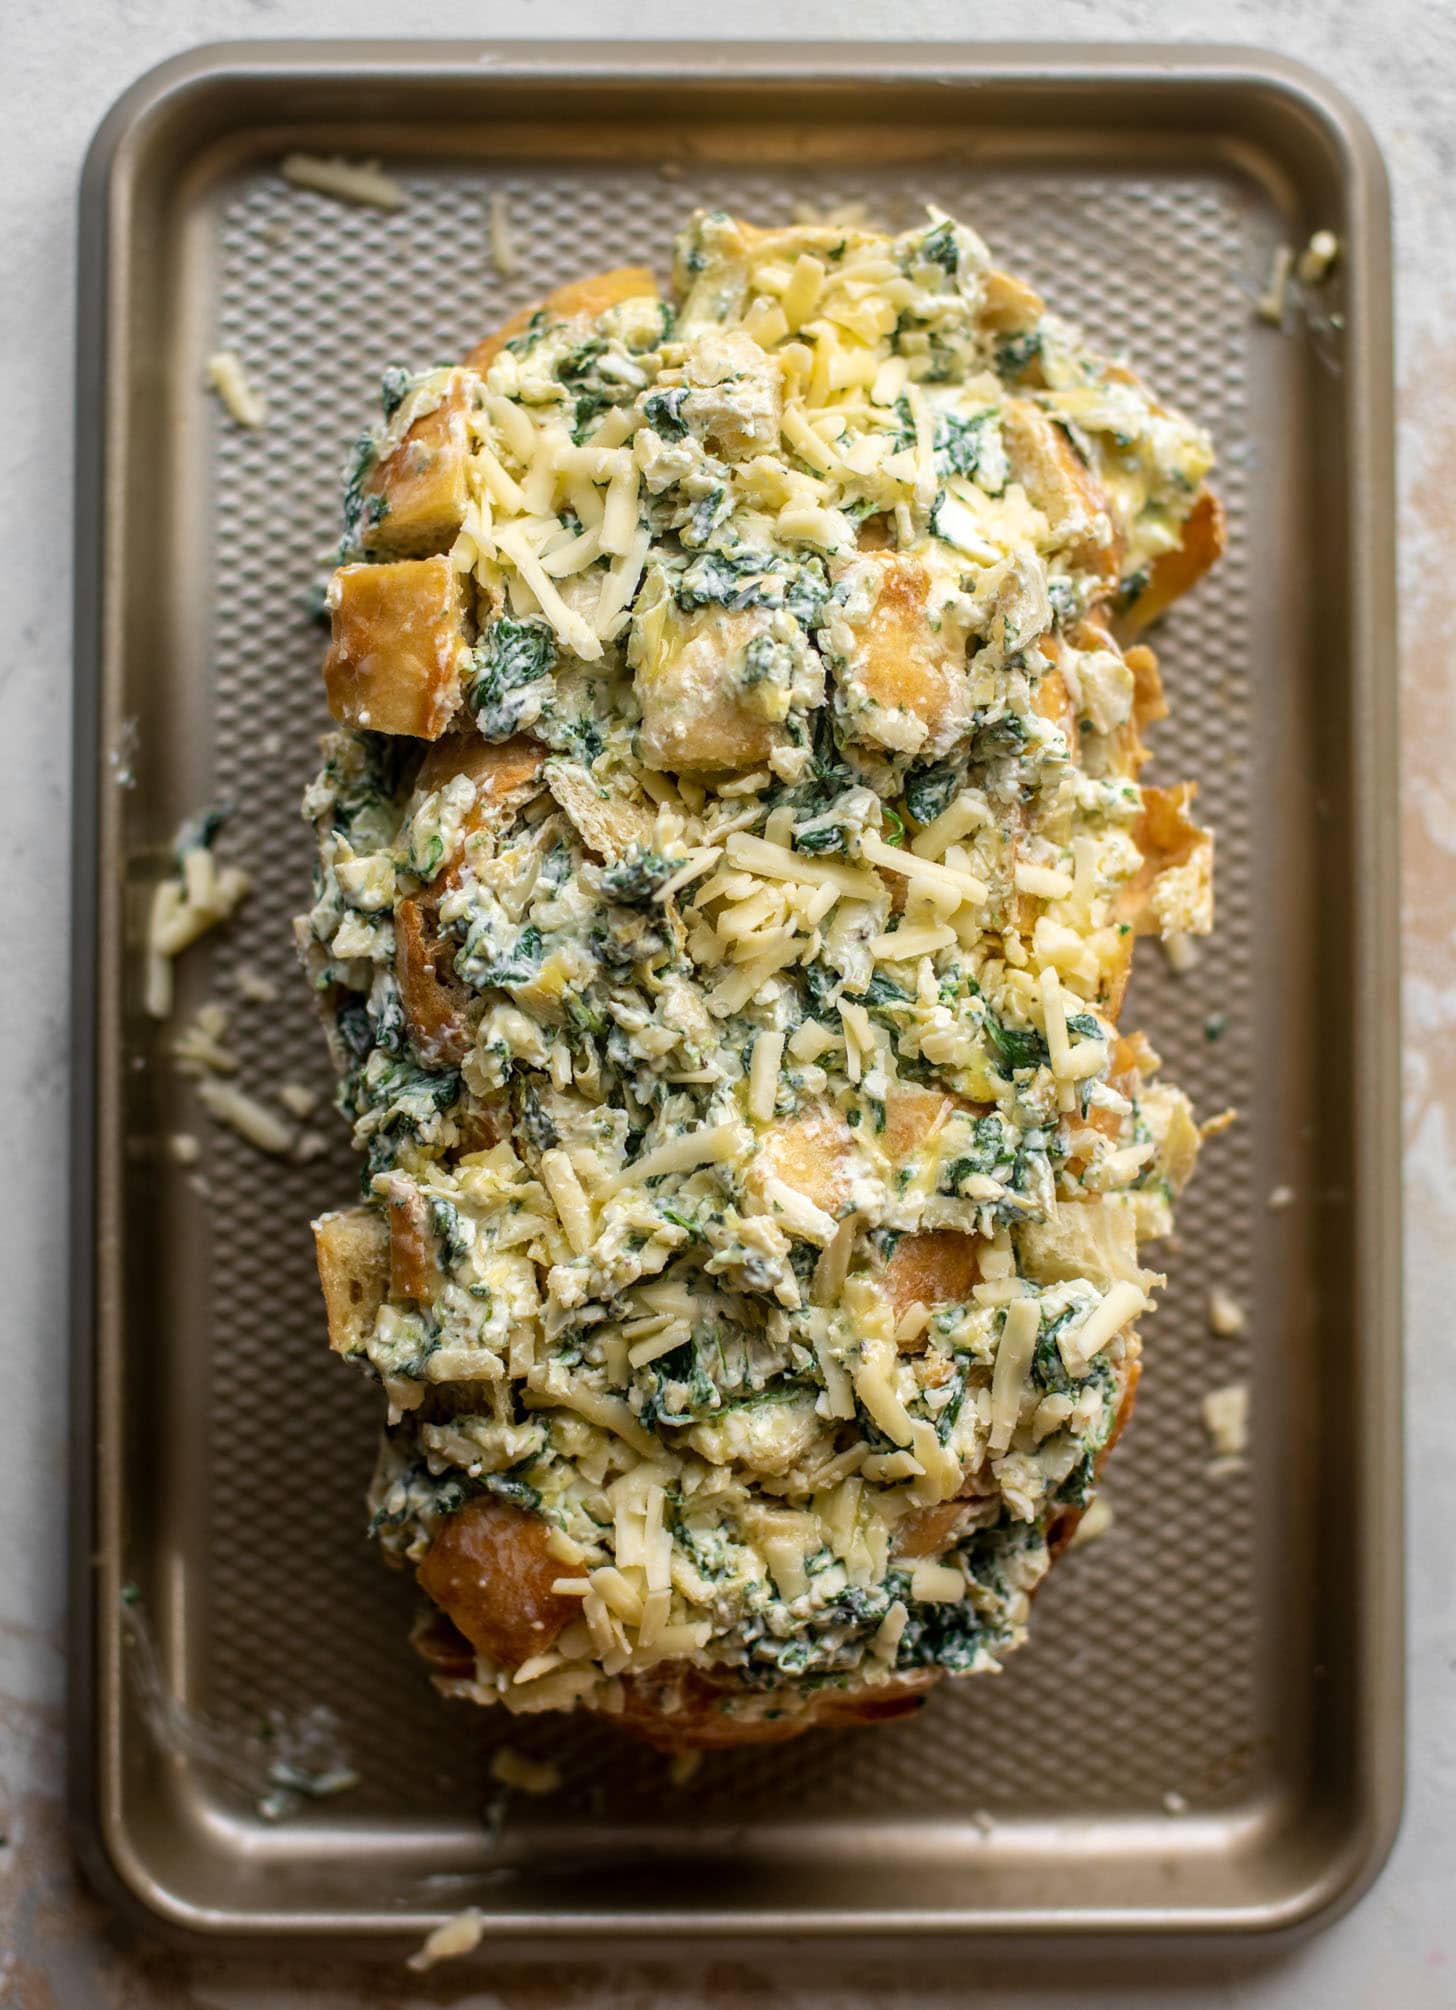 bread sliced and stuffed with spinach artichoke dip